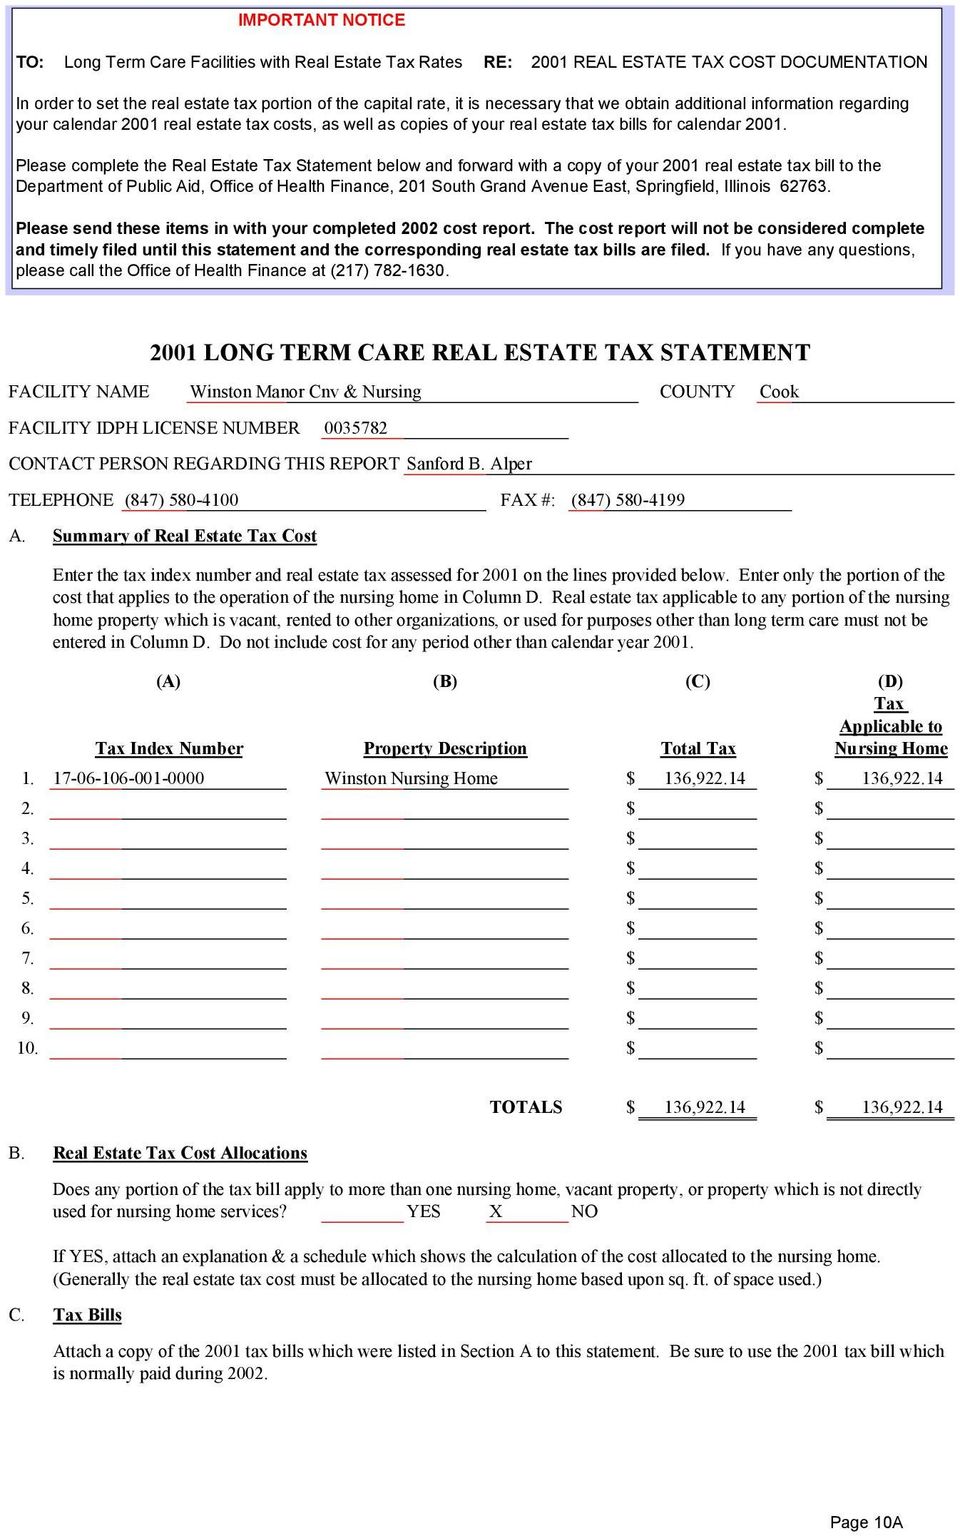 Please complete the Real Estate Tax Statement below and forward with a copy of your 2001 real estate tax bill to the Department of Public Aid, Office of Health Finance, 201 South Grand Avenue East,